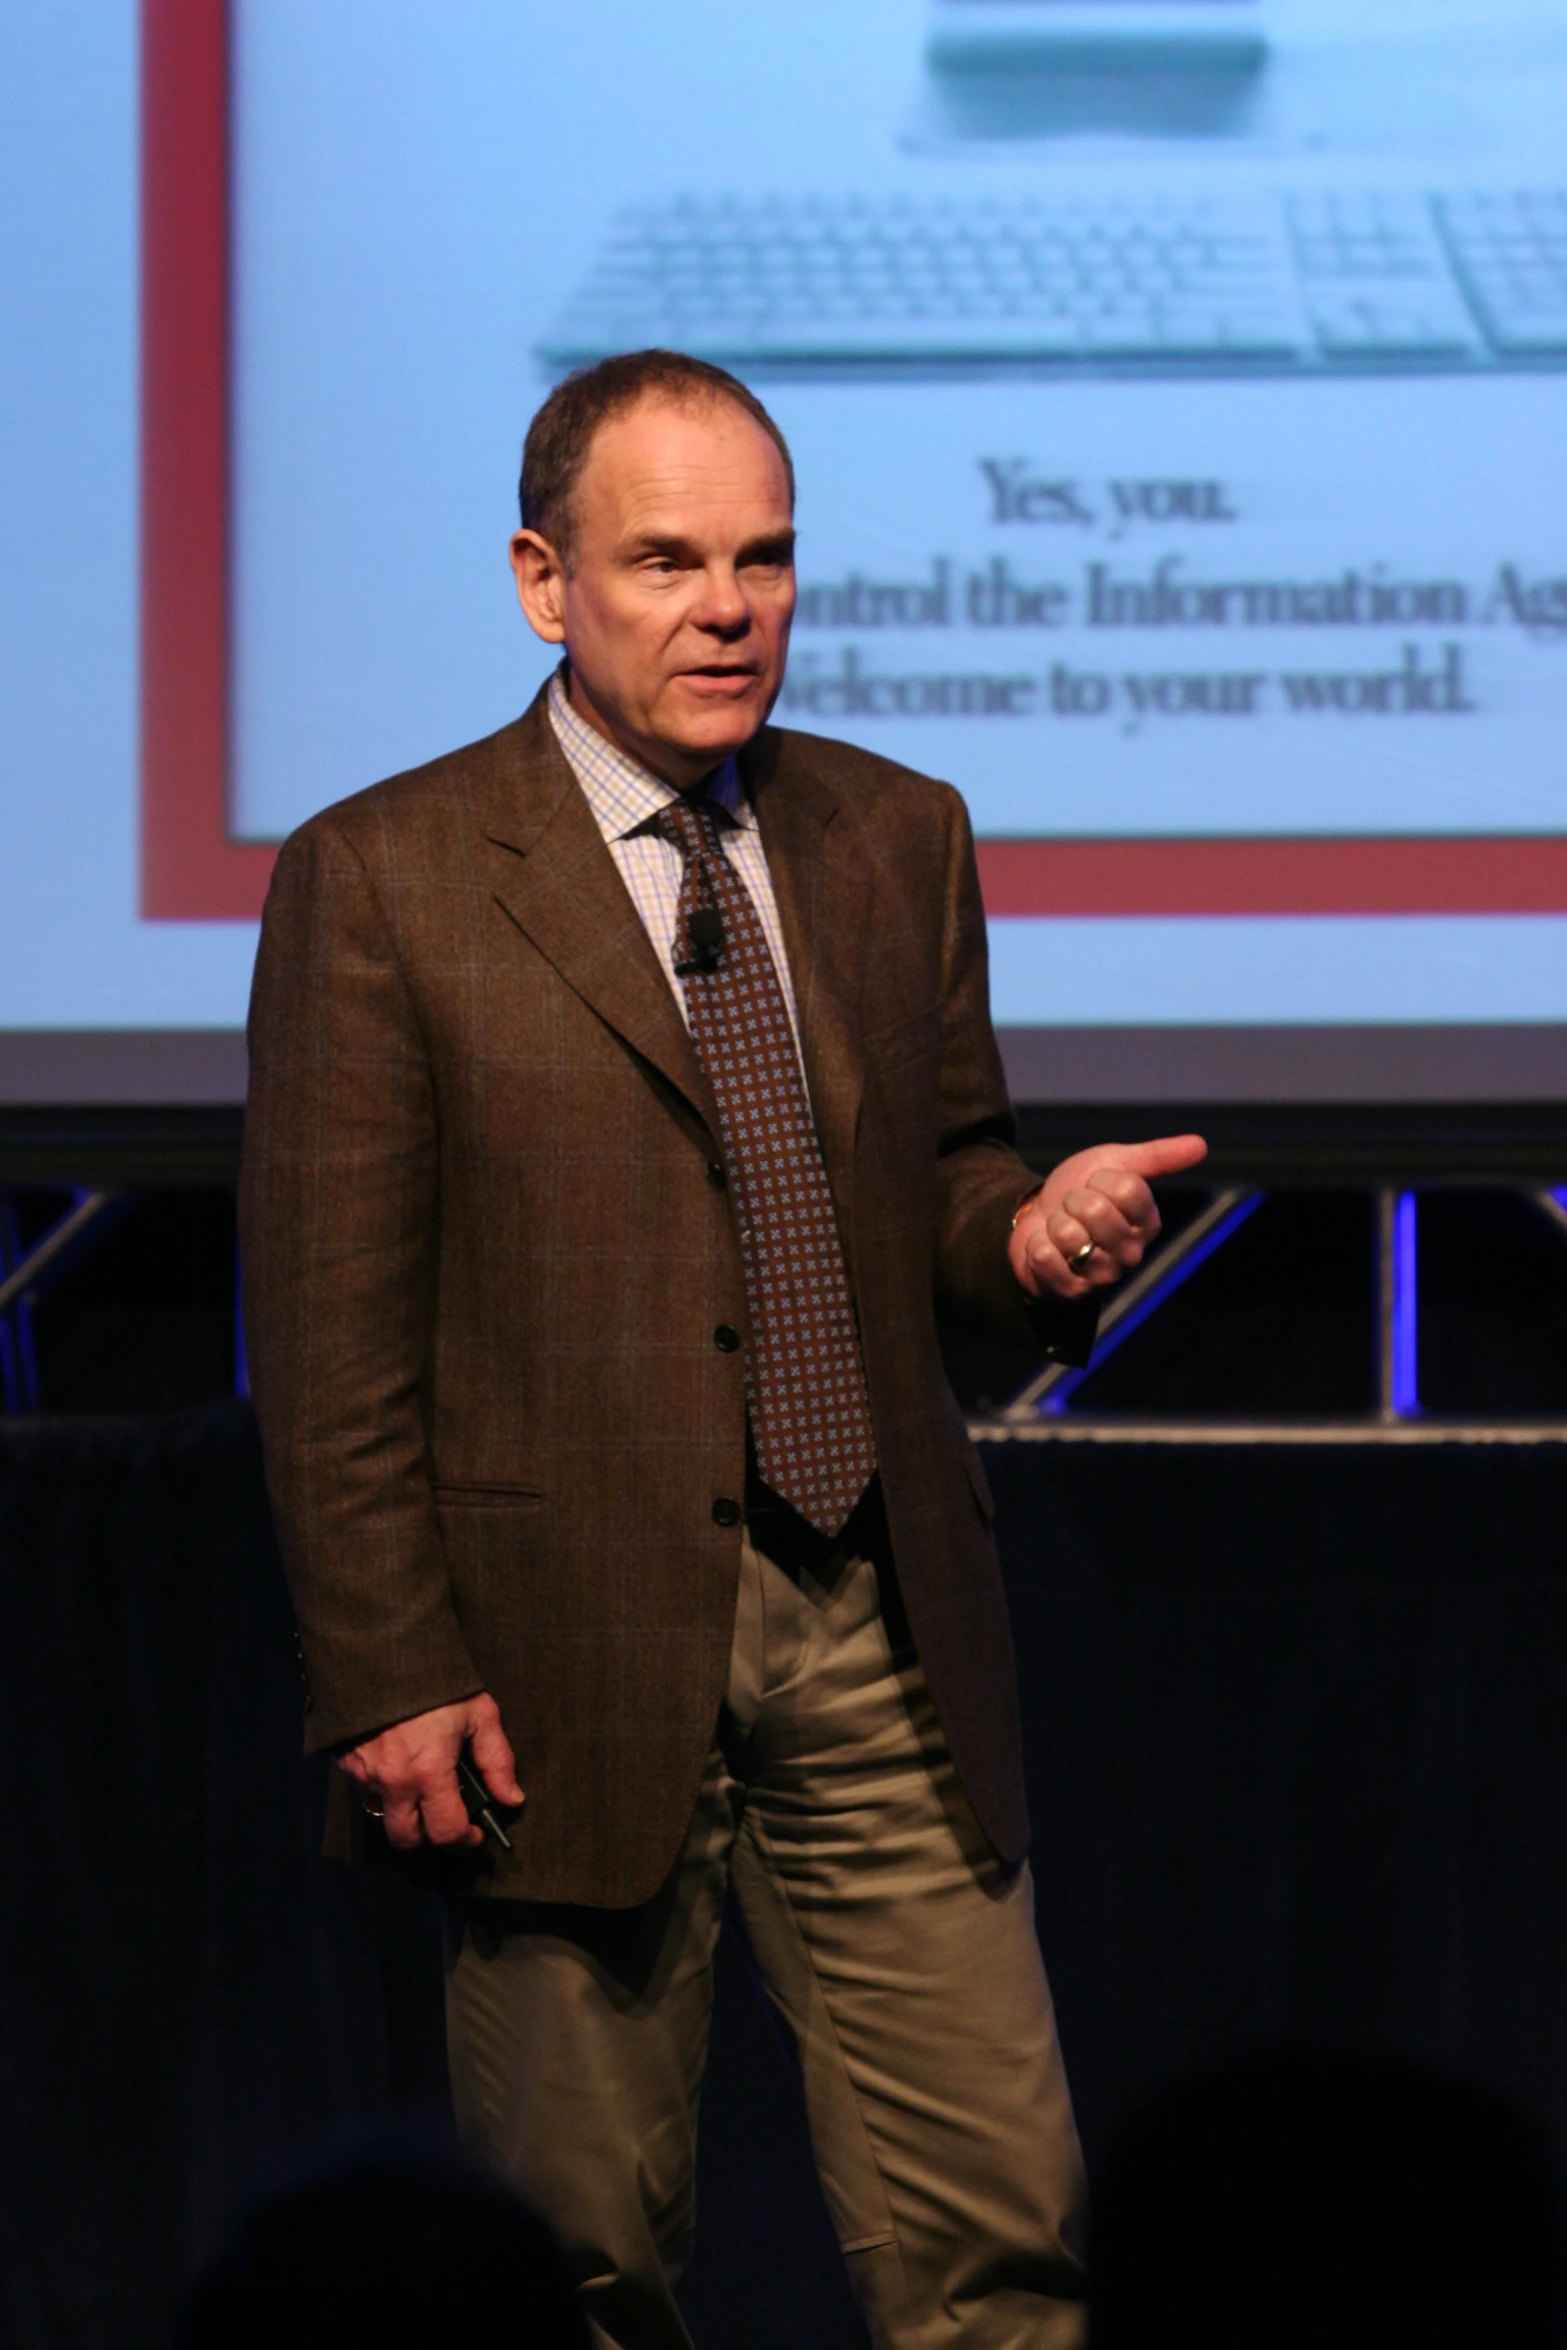 a man standing in front of a projection screen at a conference